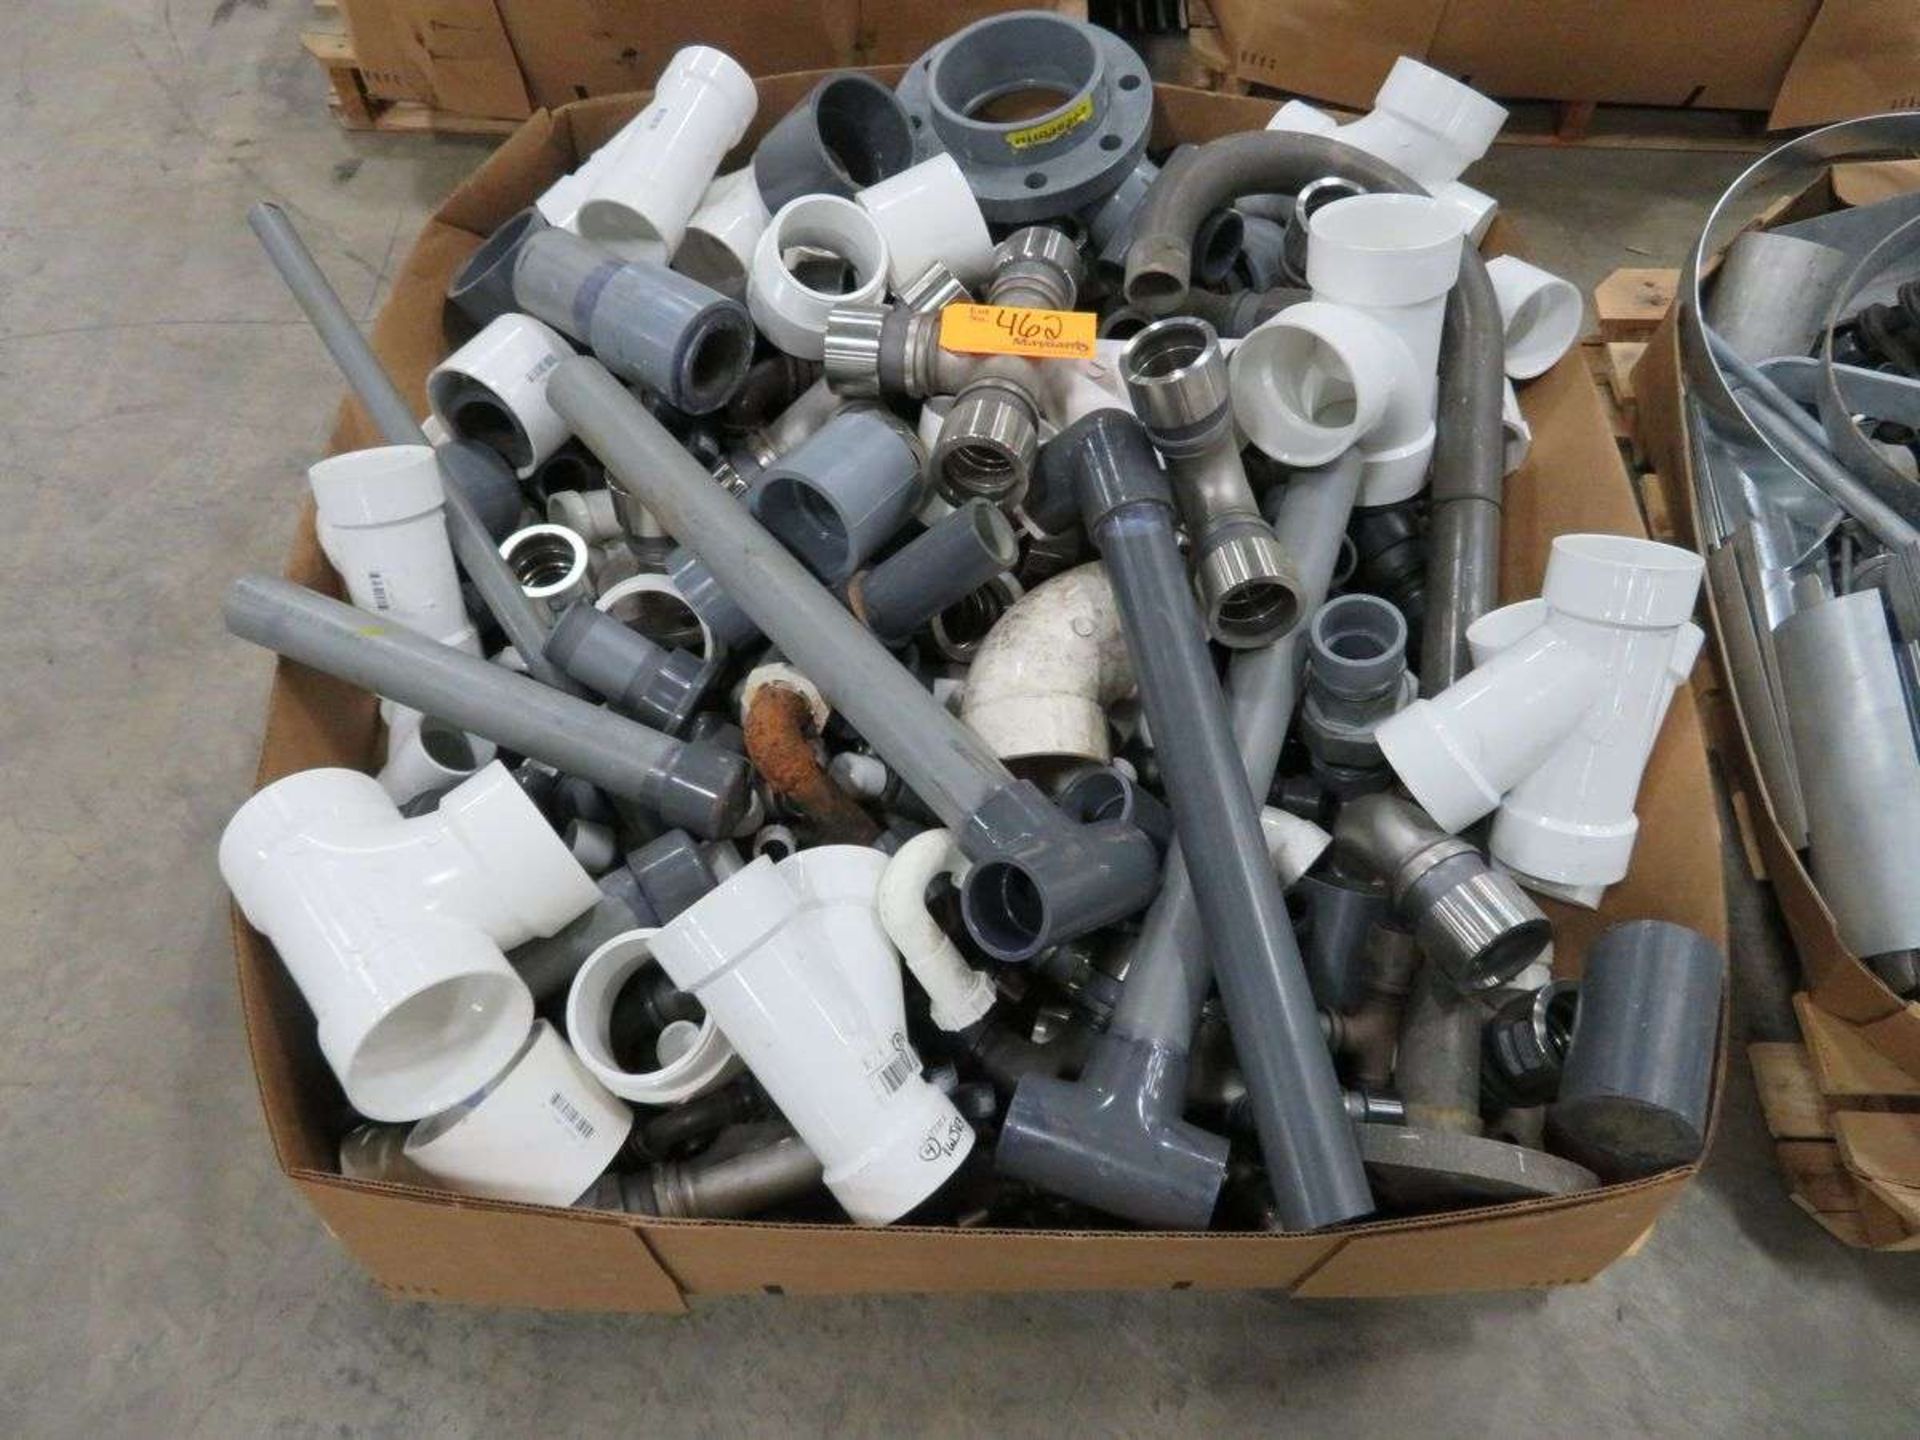 (10) Pallets of Assorted Pipe Fittings, Couplings, Support Clamps, High Pressure Fittings, Etc. - Bild 11 aus 11